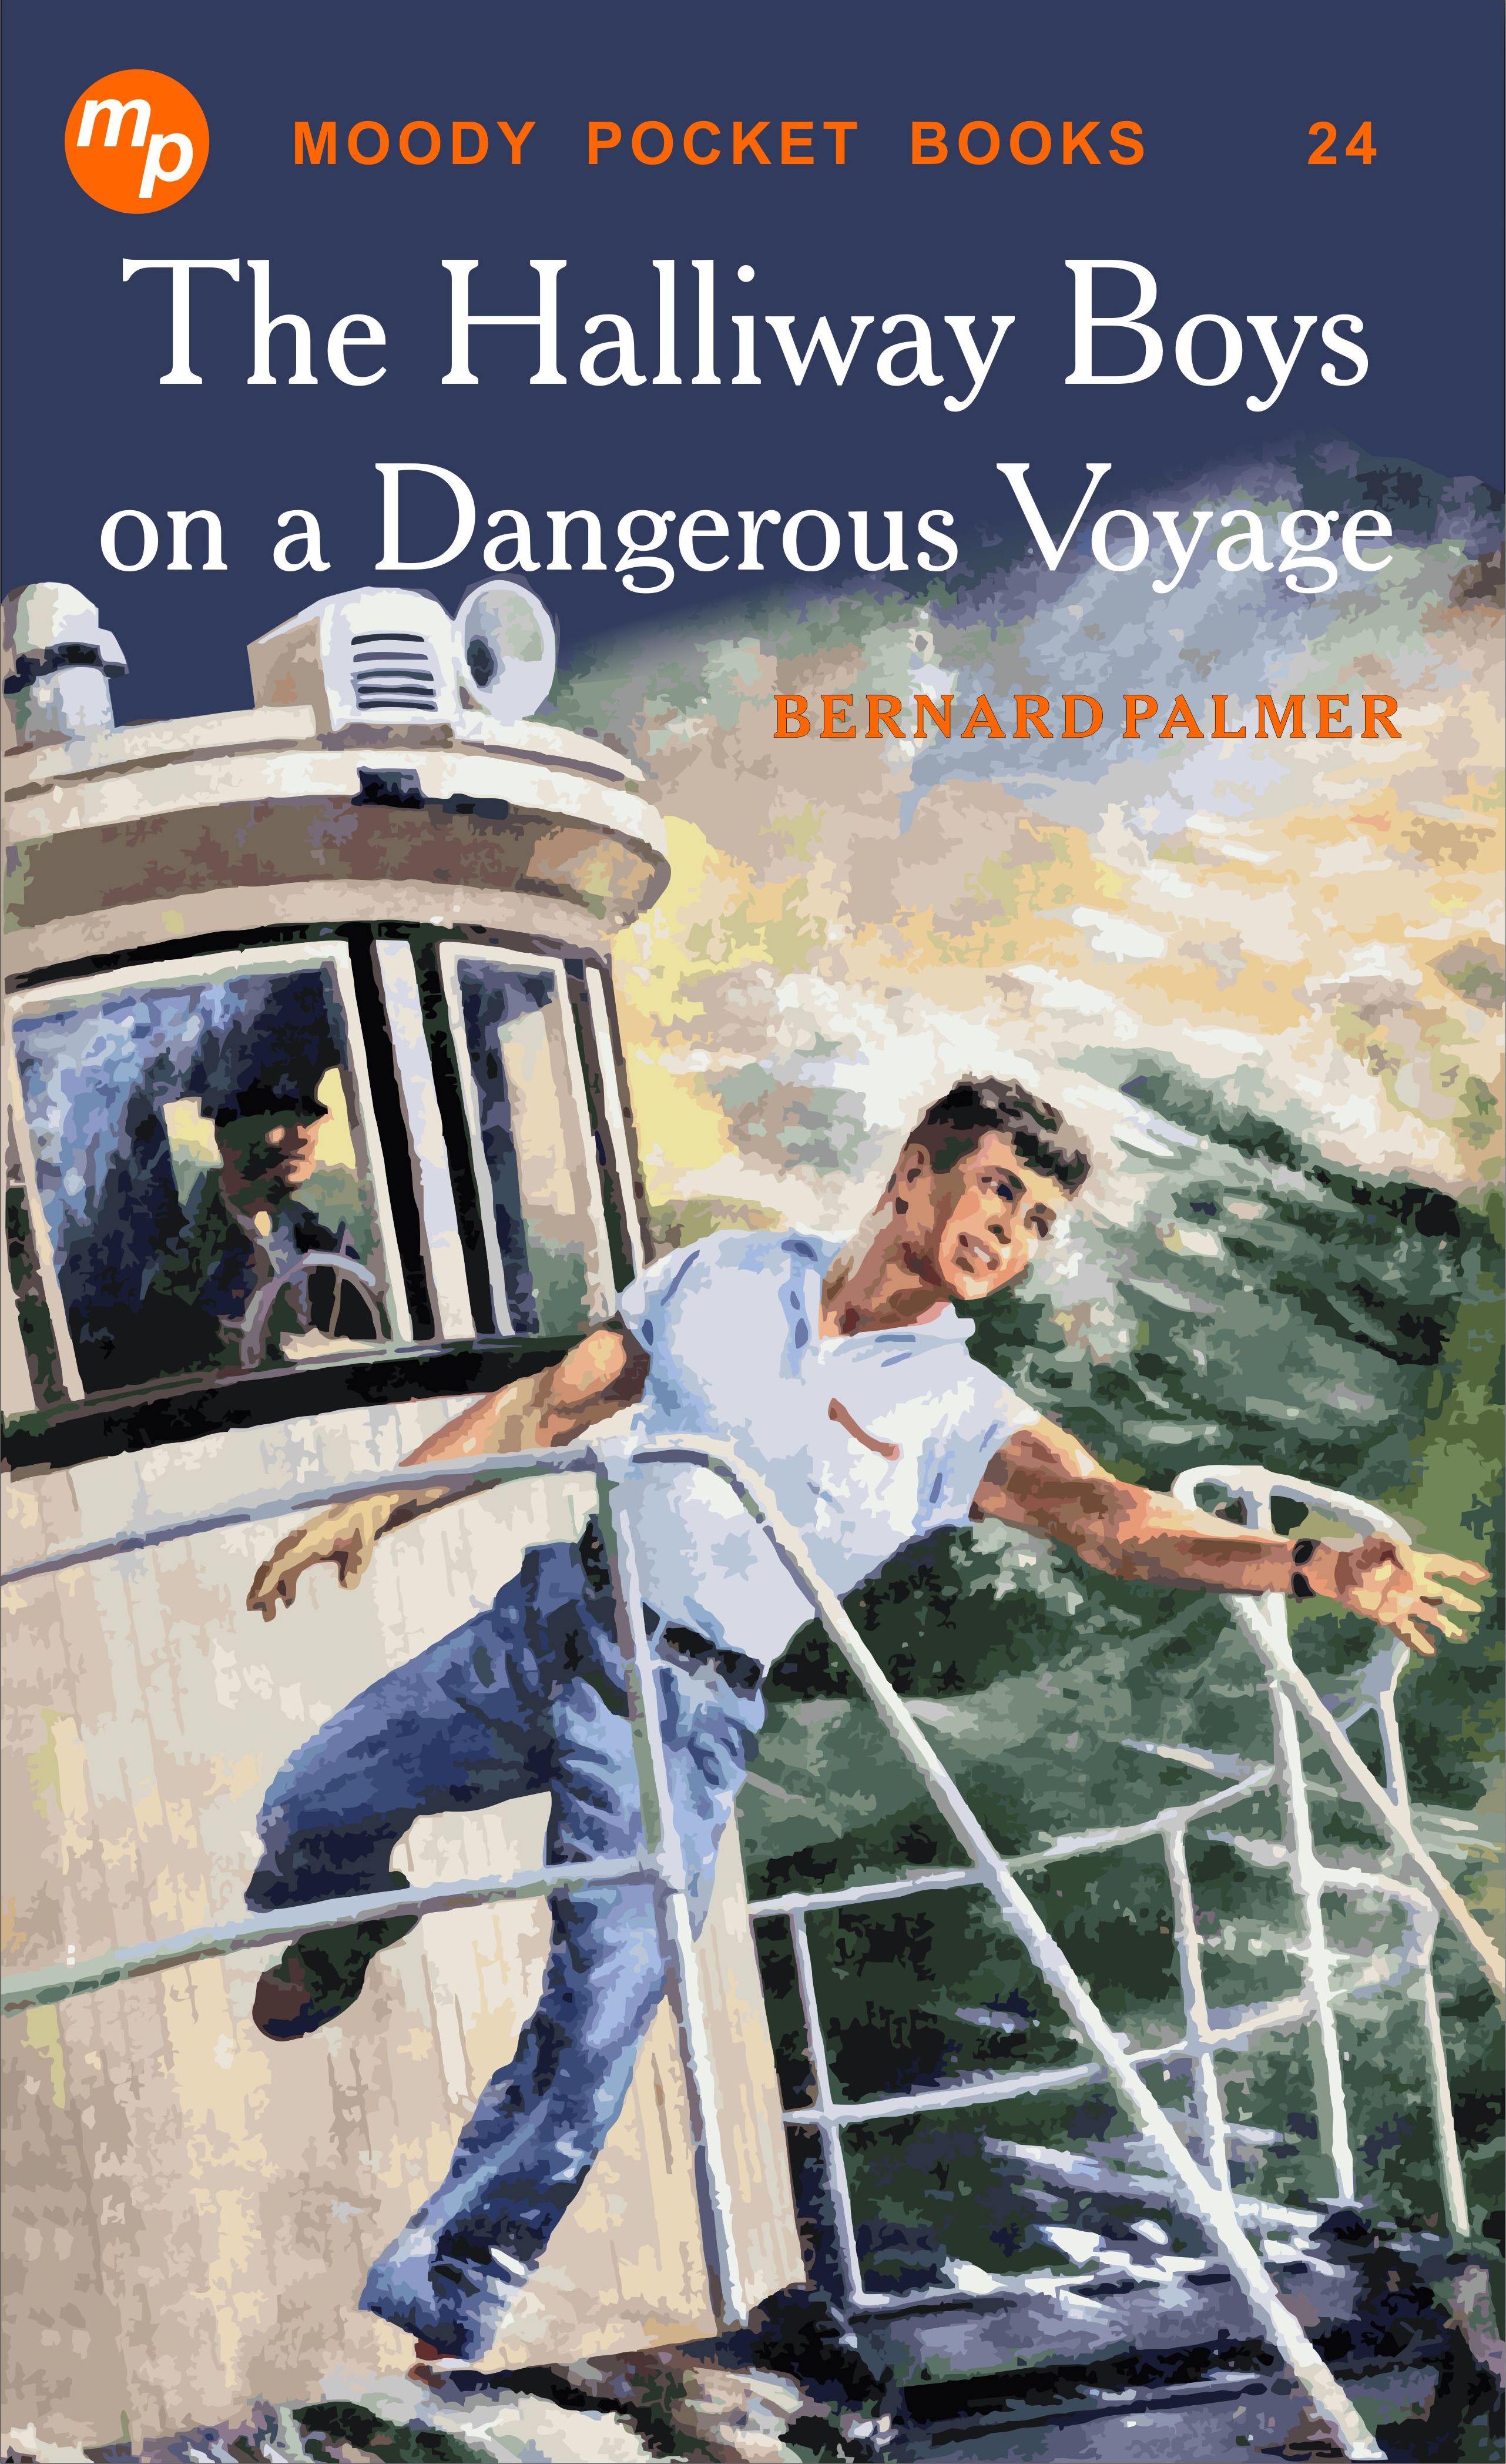 The Halliway Boys on a Dangerour Voyage